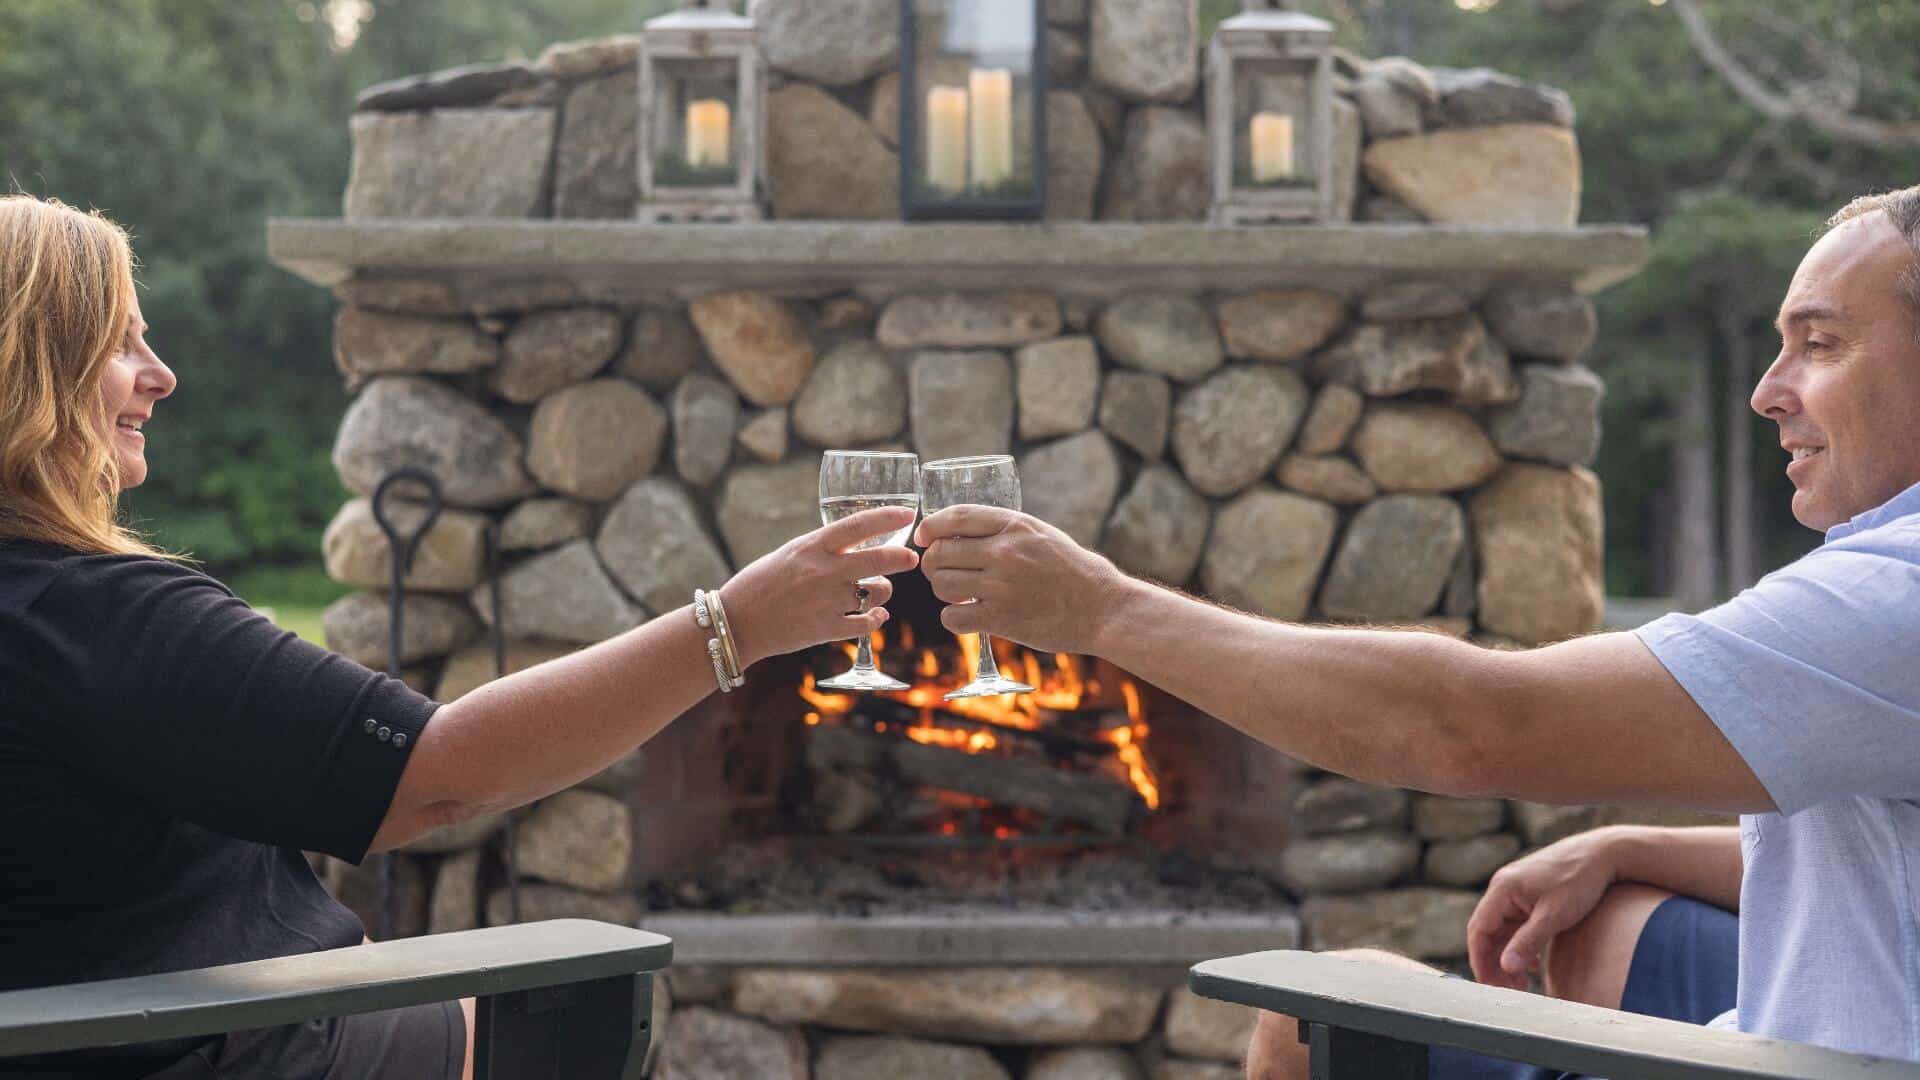 A couple toasting with glasses of white wine, sitting in wood armchairs outside by a stone fireplace with a fire going.